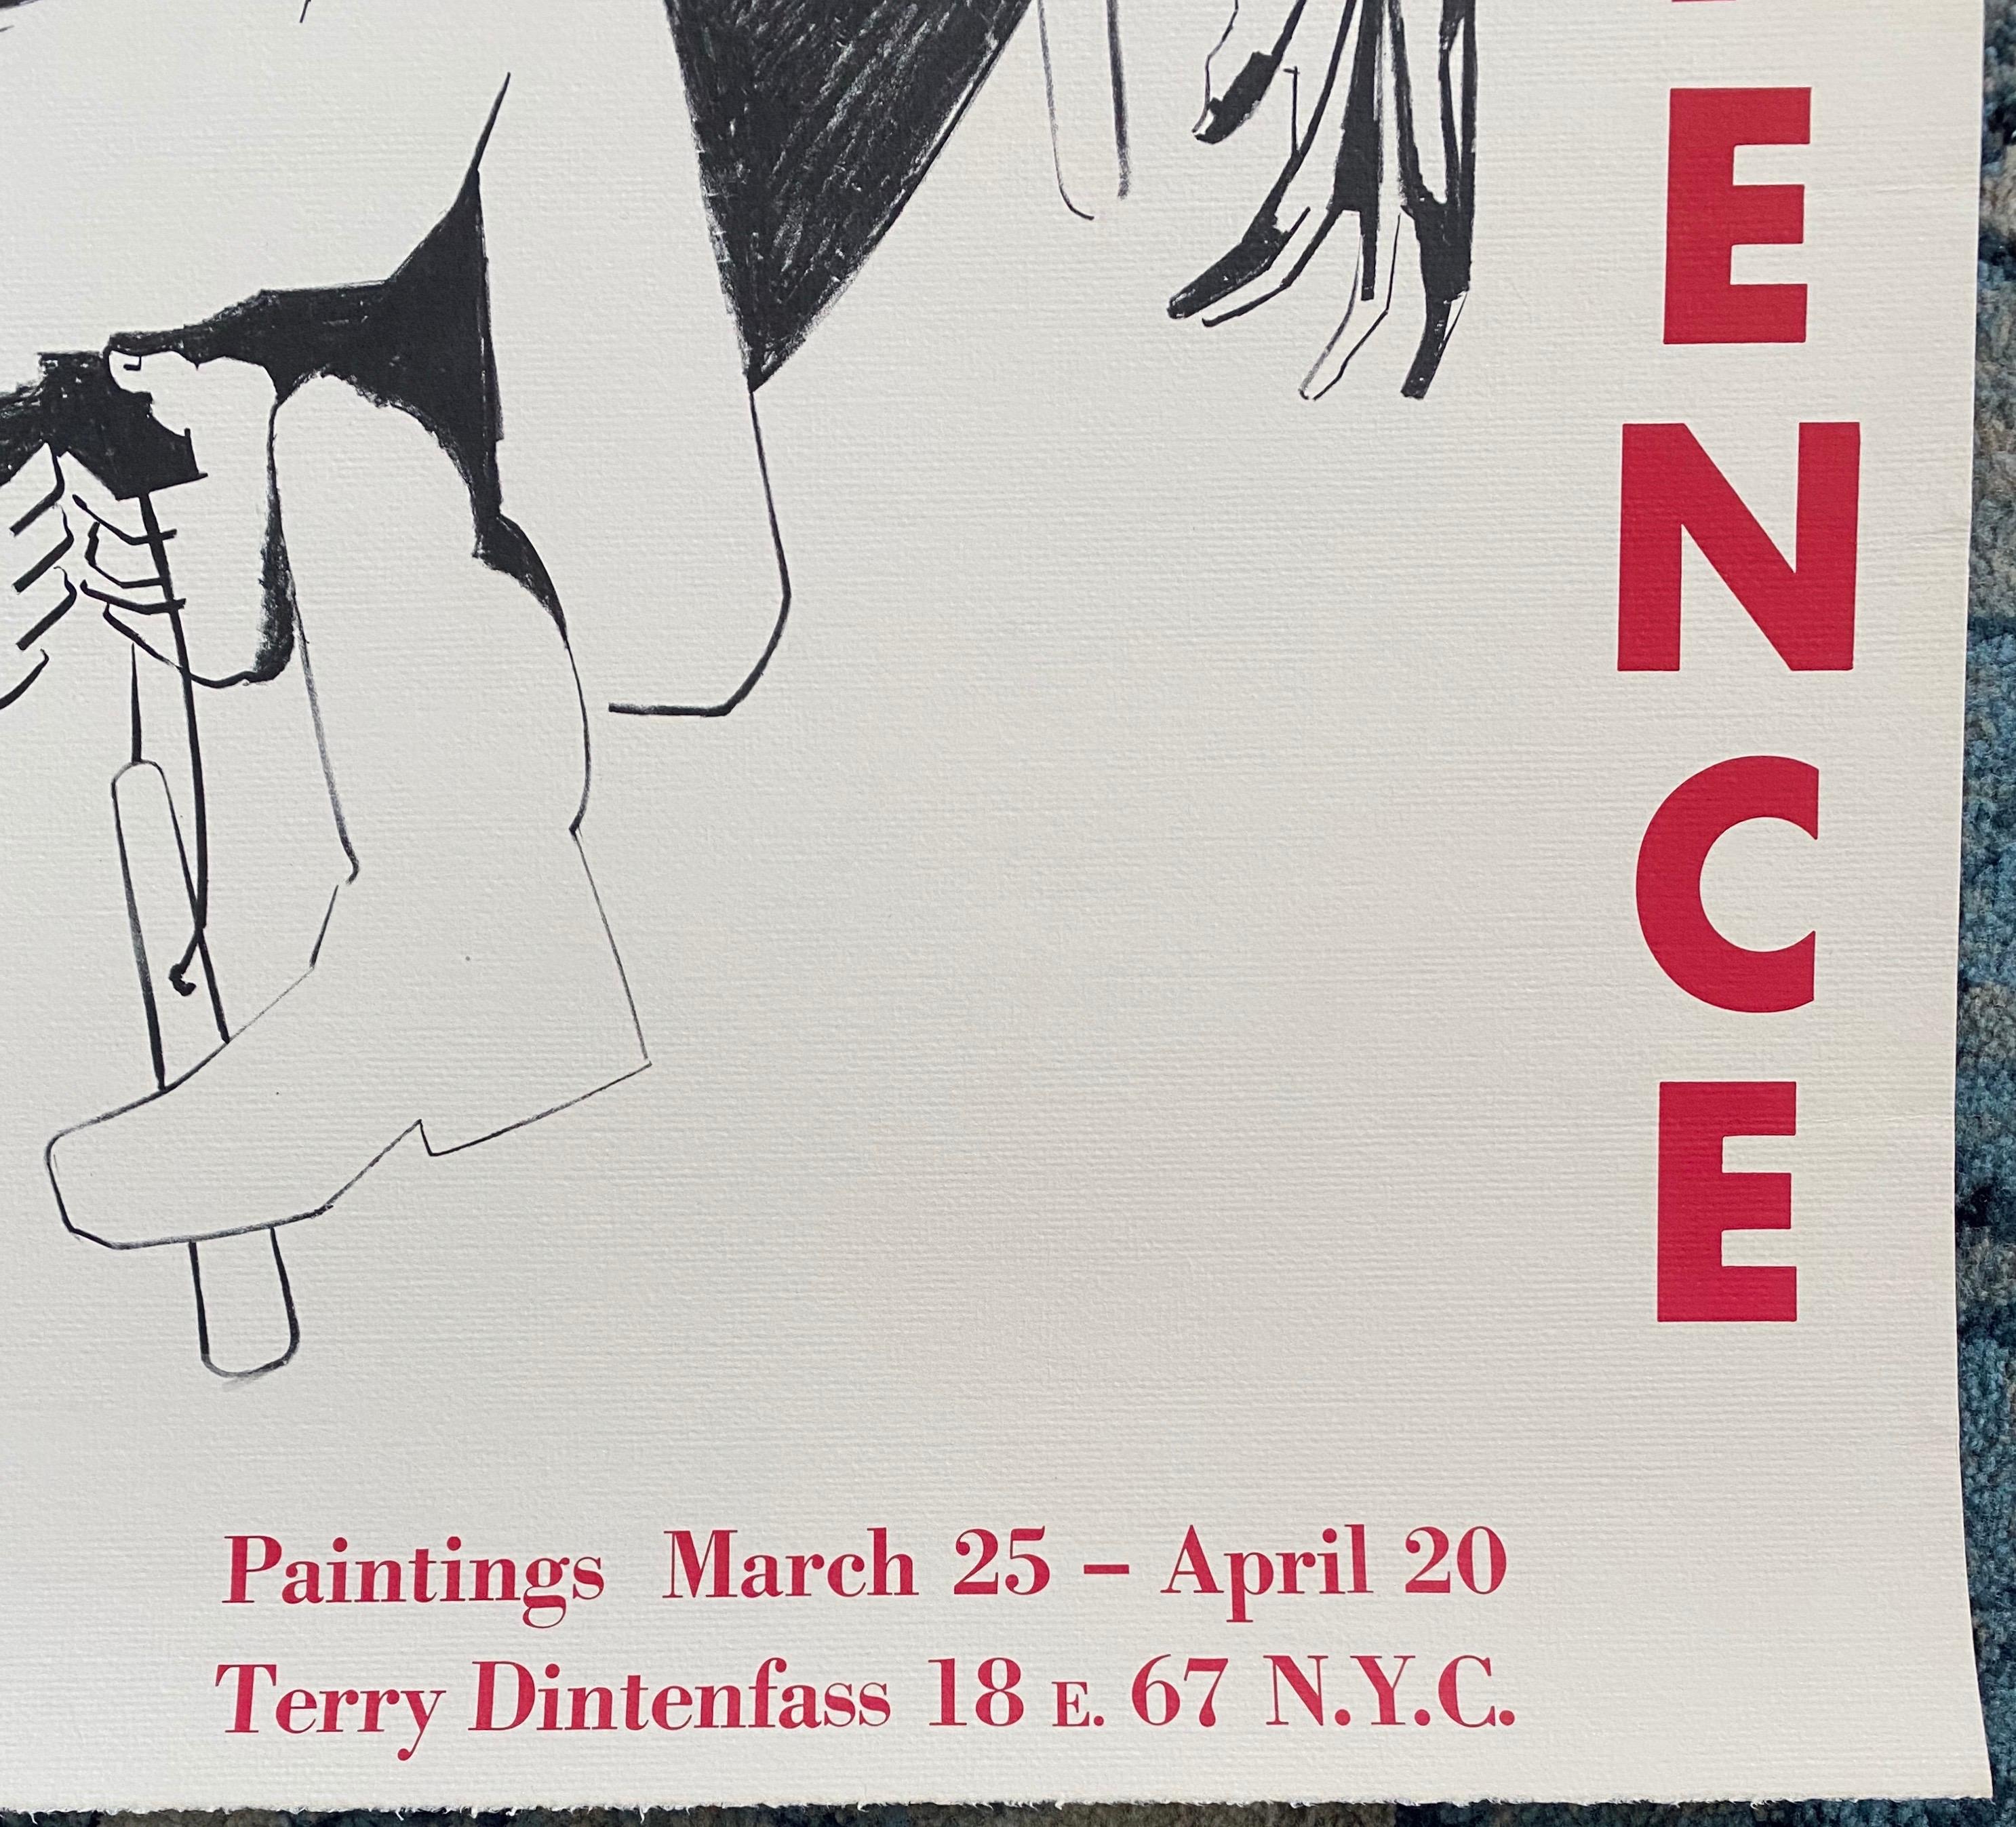 Vintage Lithograph Exhibition Poster Terry Dintenfass Gallery New York - Modern Print by Jacob Lawrence